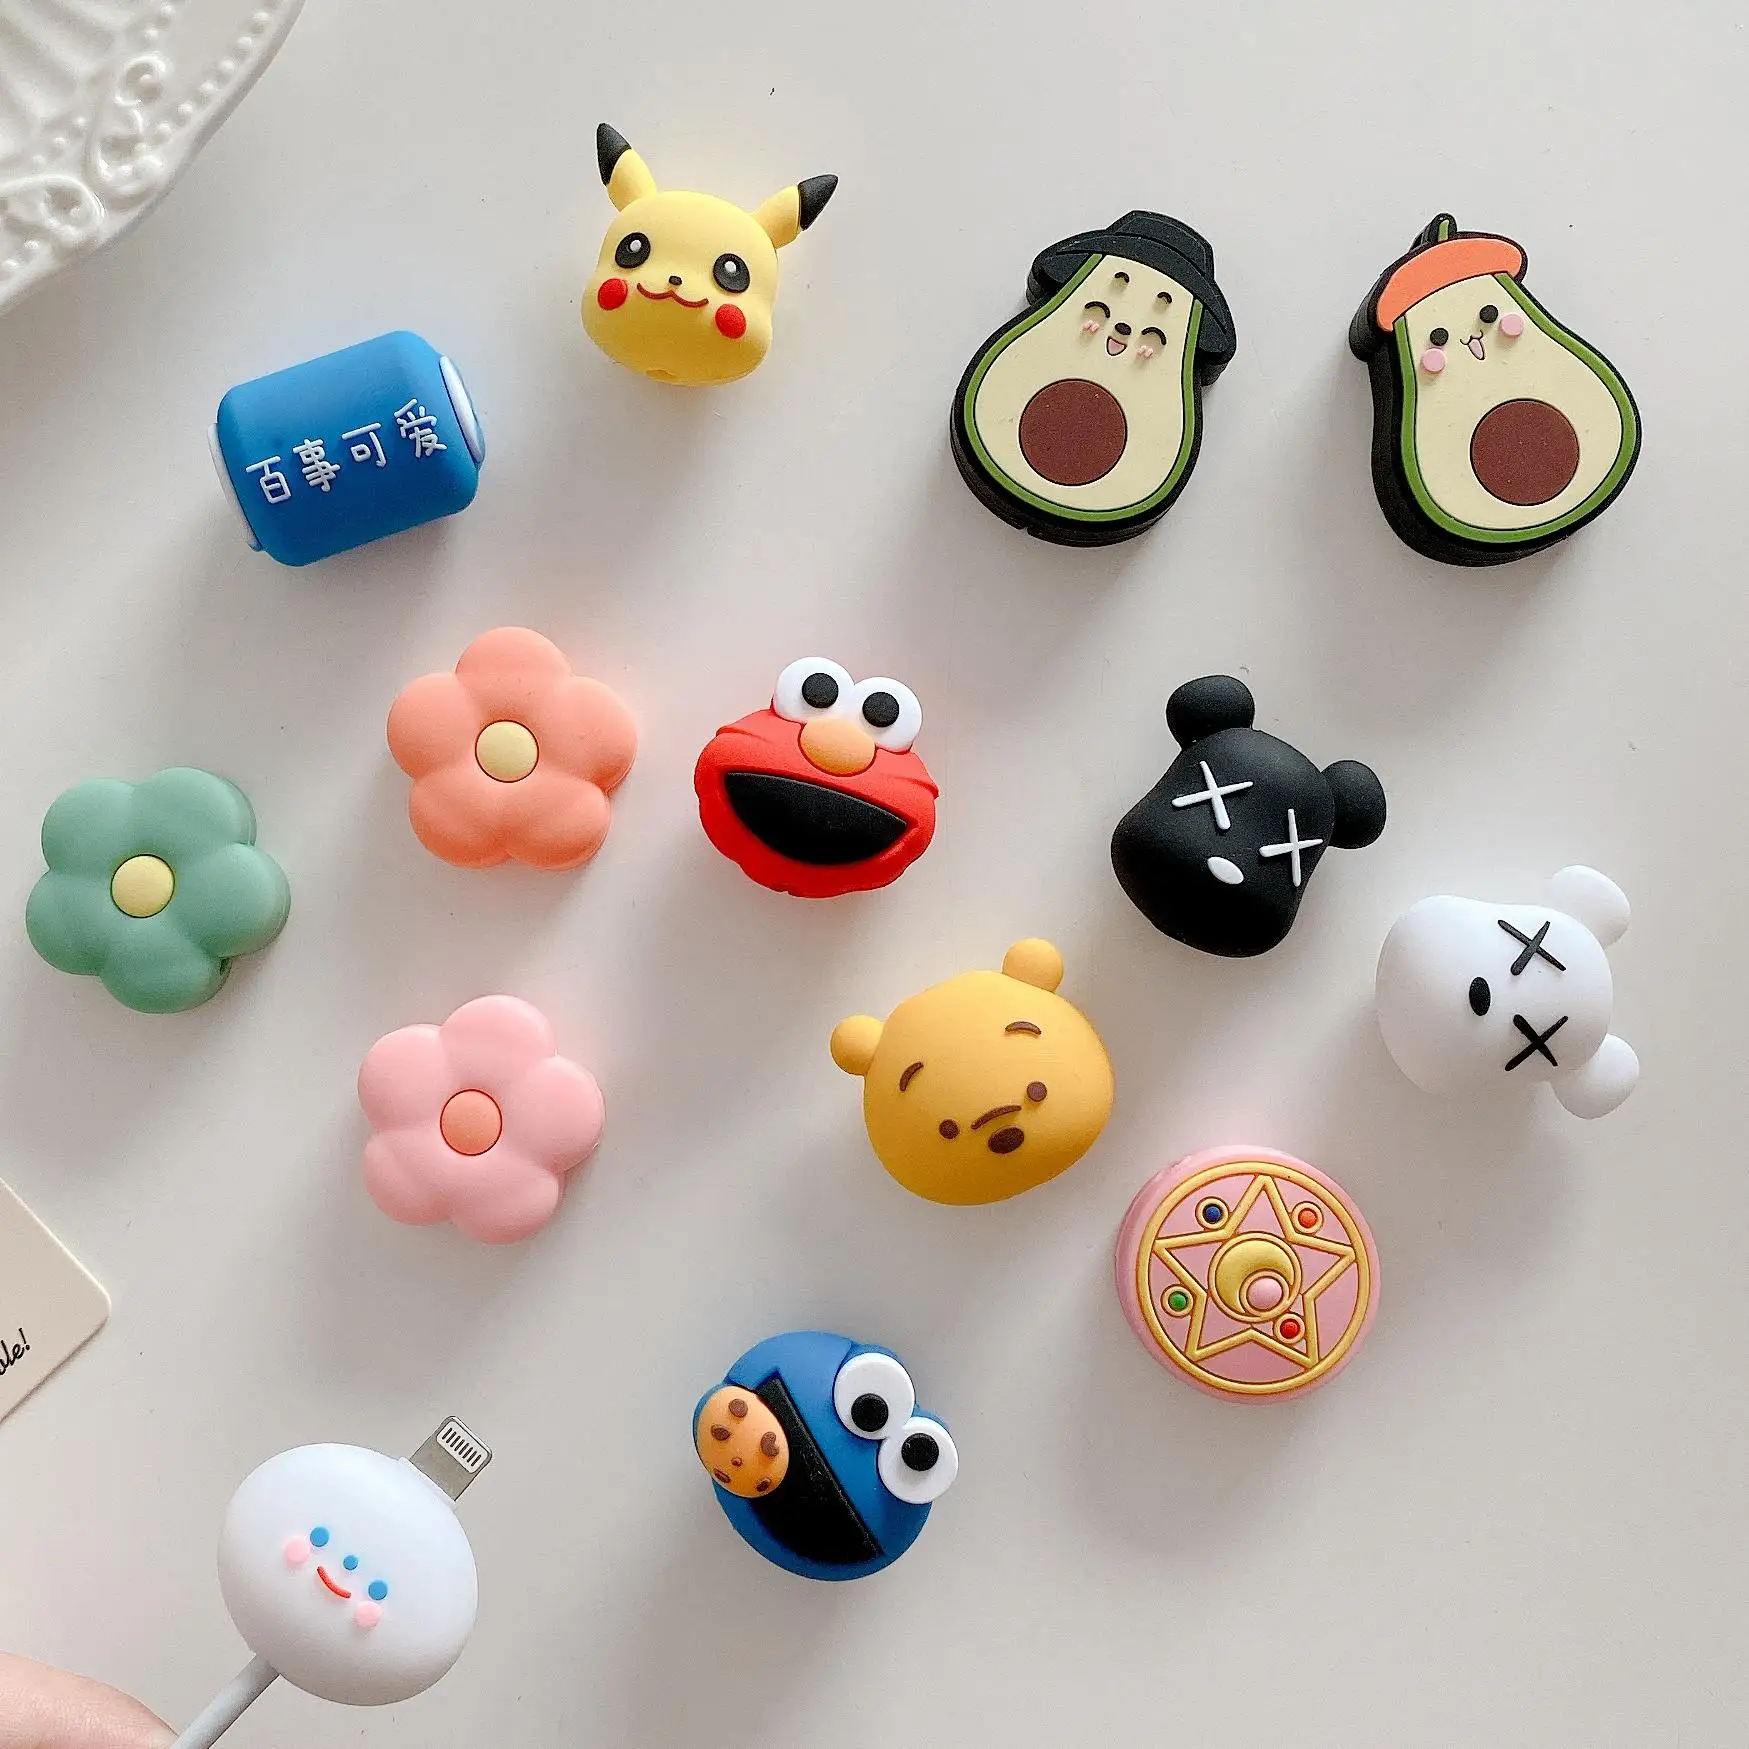 

Hot Cartoon Data Line Cover Soft Fruit Cable Bite Phone Charger Protector with Cardboard Package Cord PVC Accessories